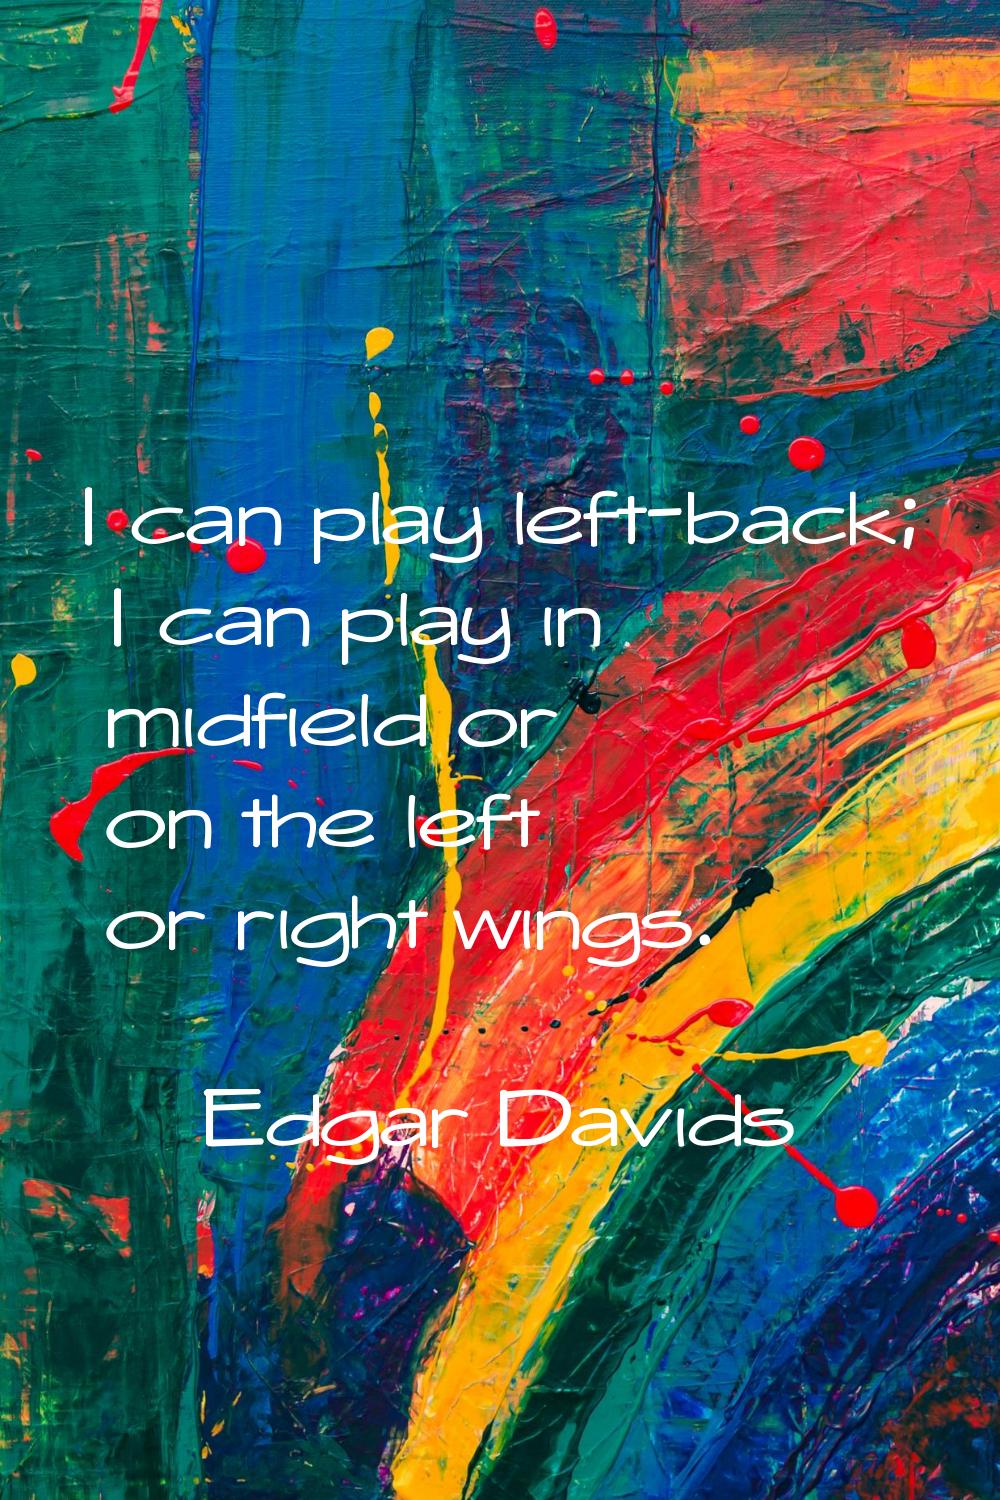 I can play left-back; I can play in midfield or on the left or right wings.